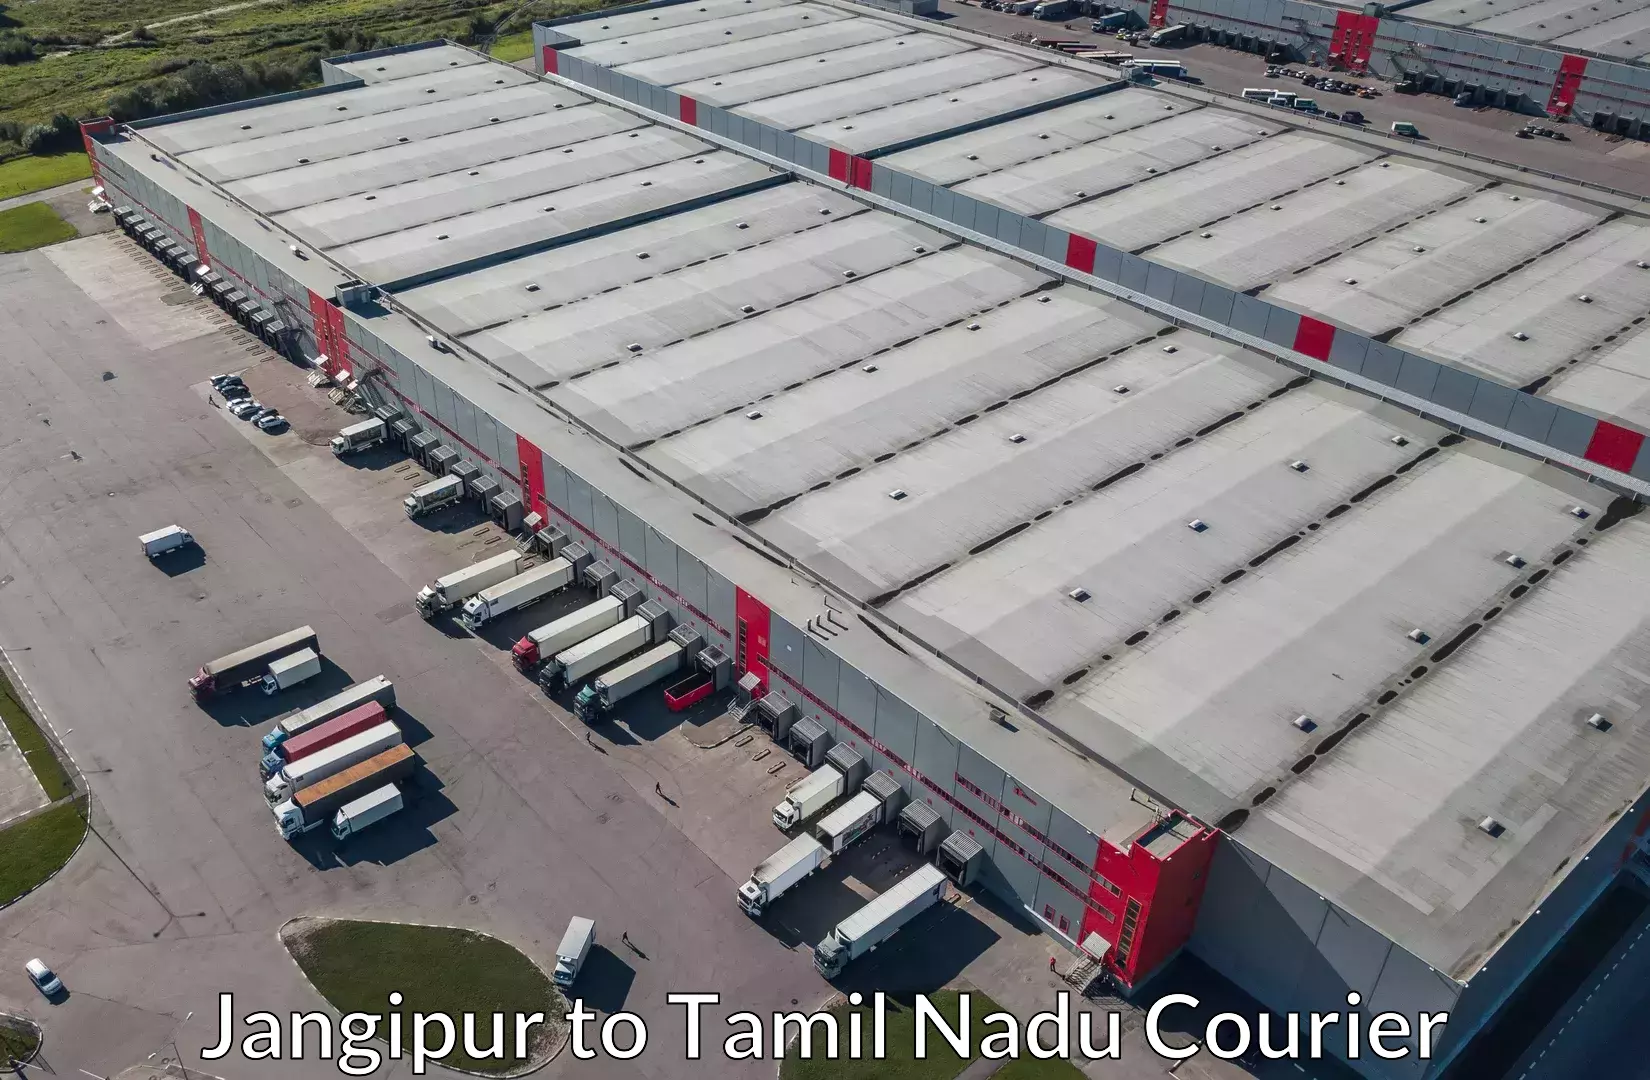 Baggage delivery technology in Jangipur to Tamil Nadu